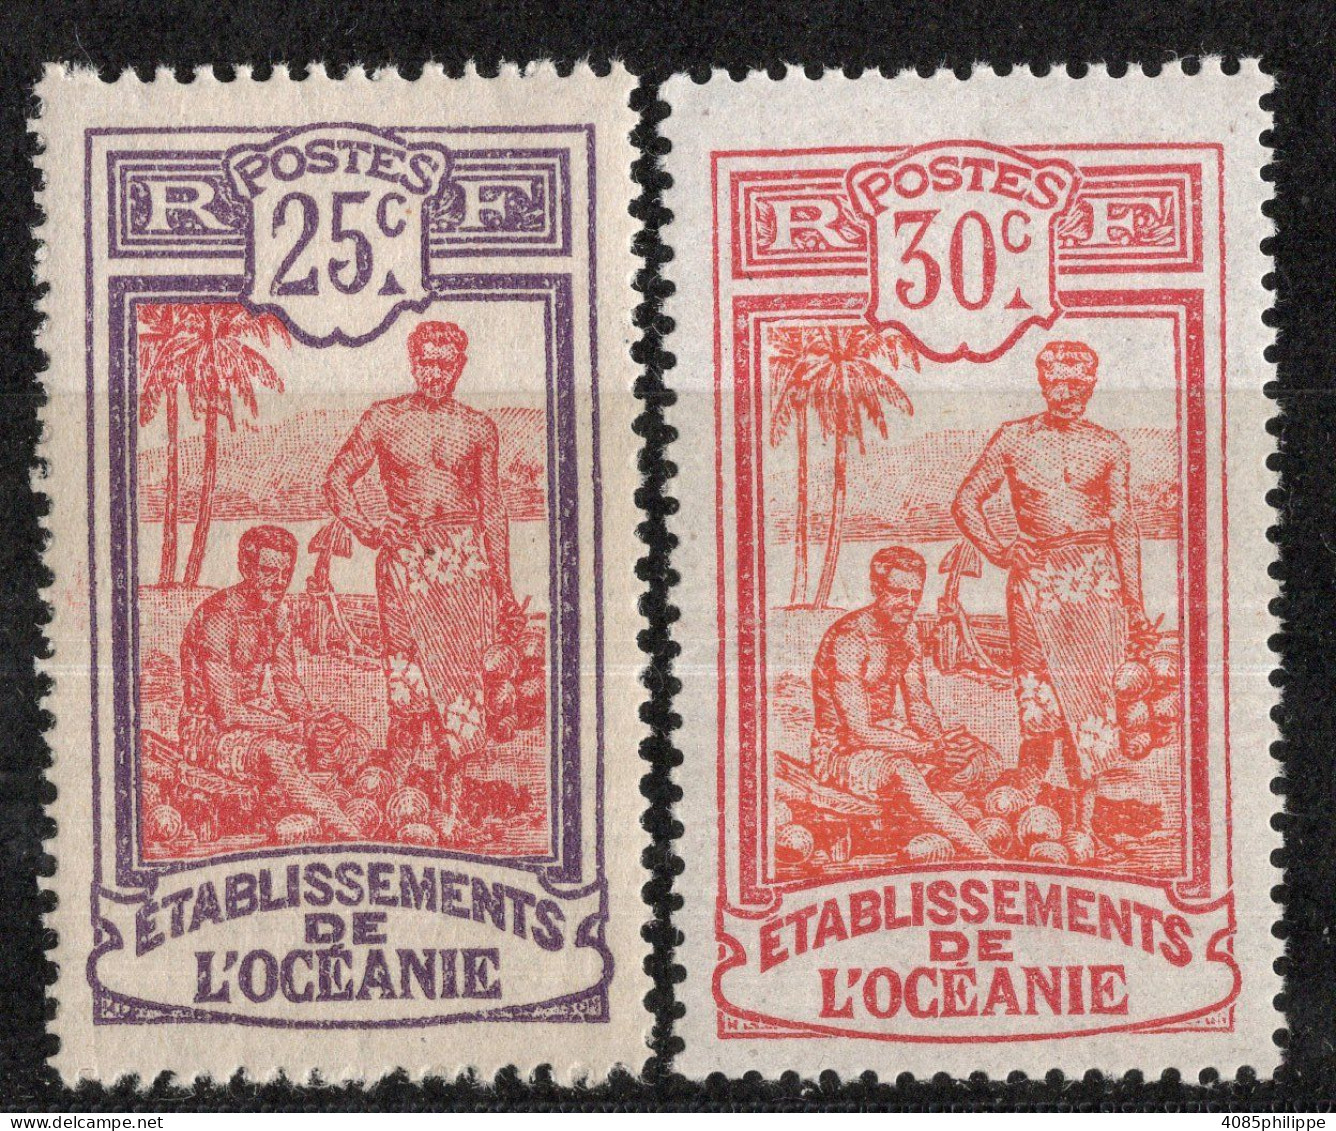 OCEANIE  Timbres-Poste N°51* & 52* Neufs Charnières TB Cote : 5.00€ - Unused Stamps